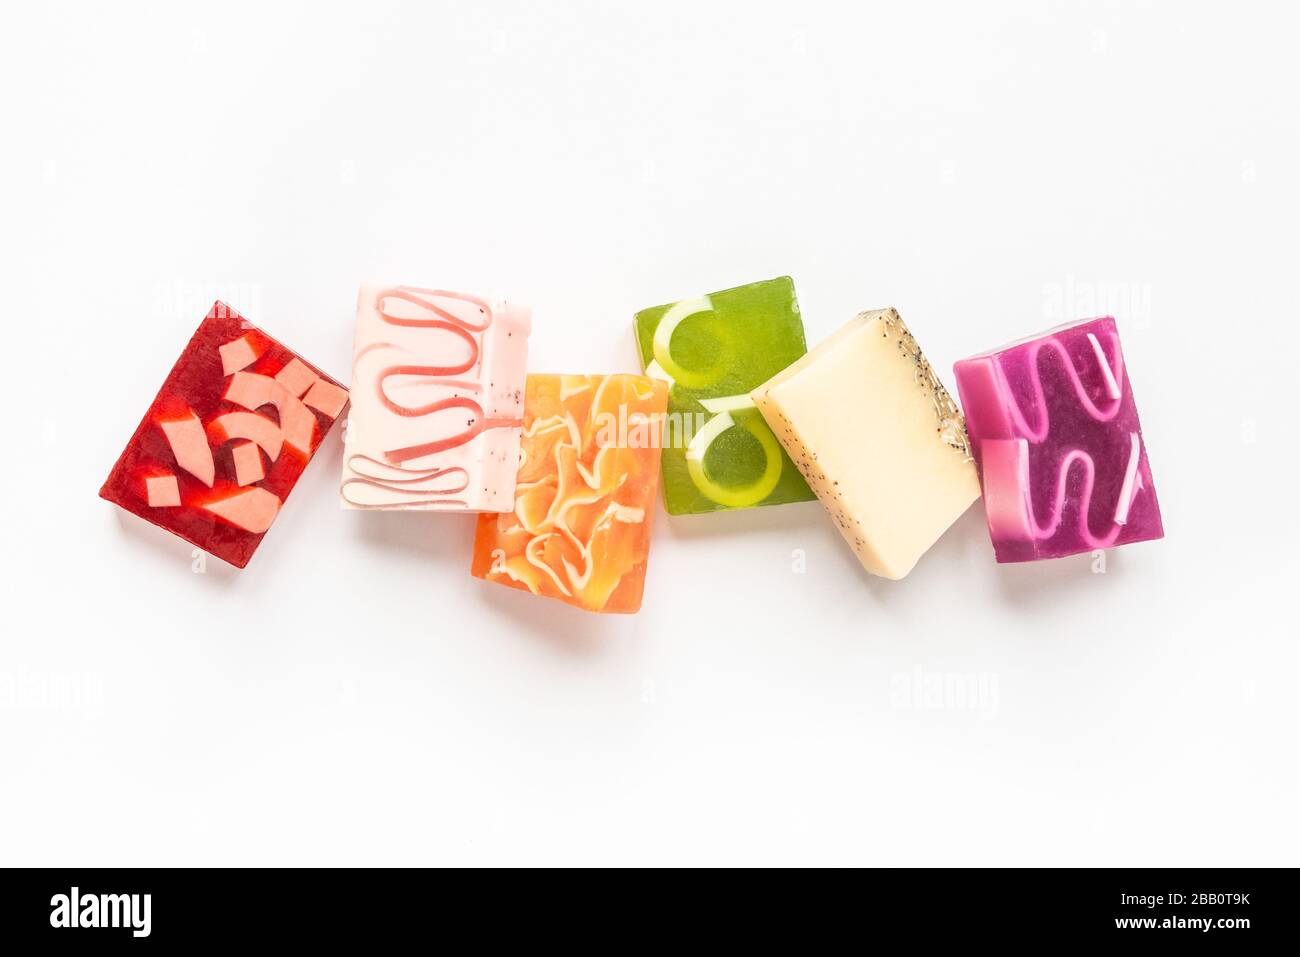 Top view of various colorful handmade soaps. Organic health care and protection. Stock Photo